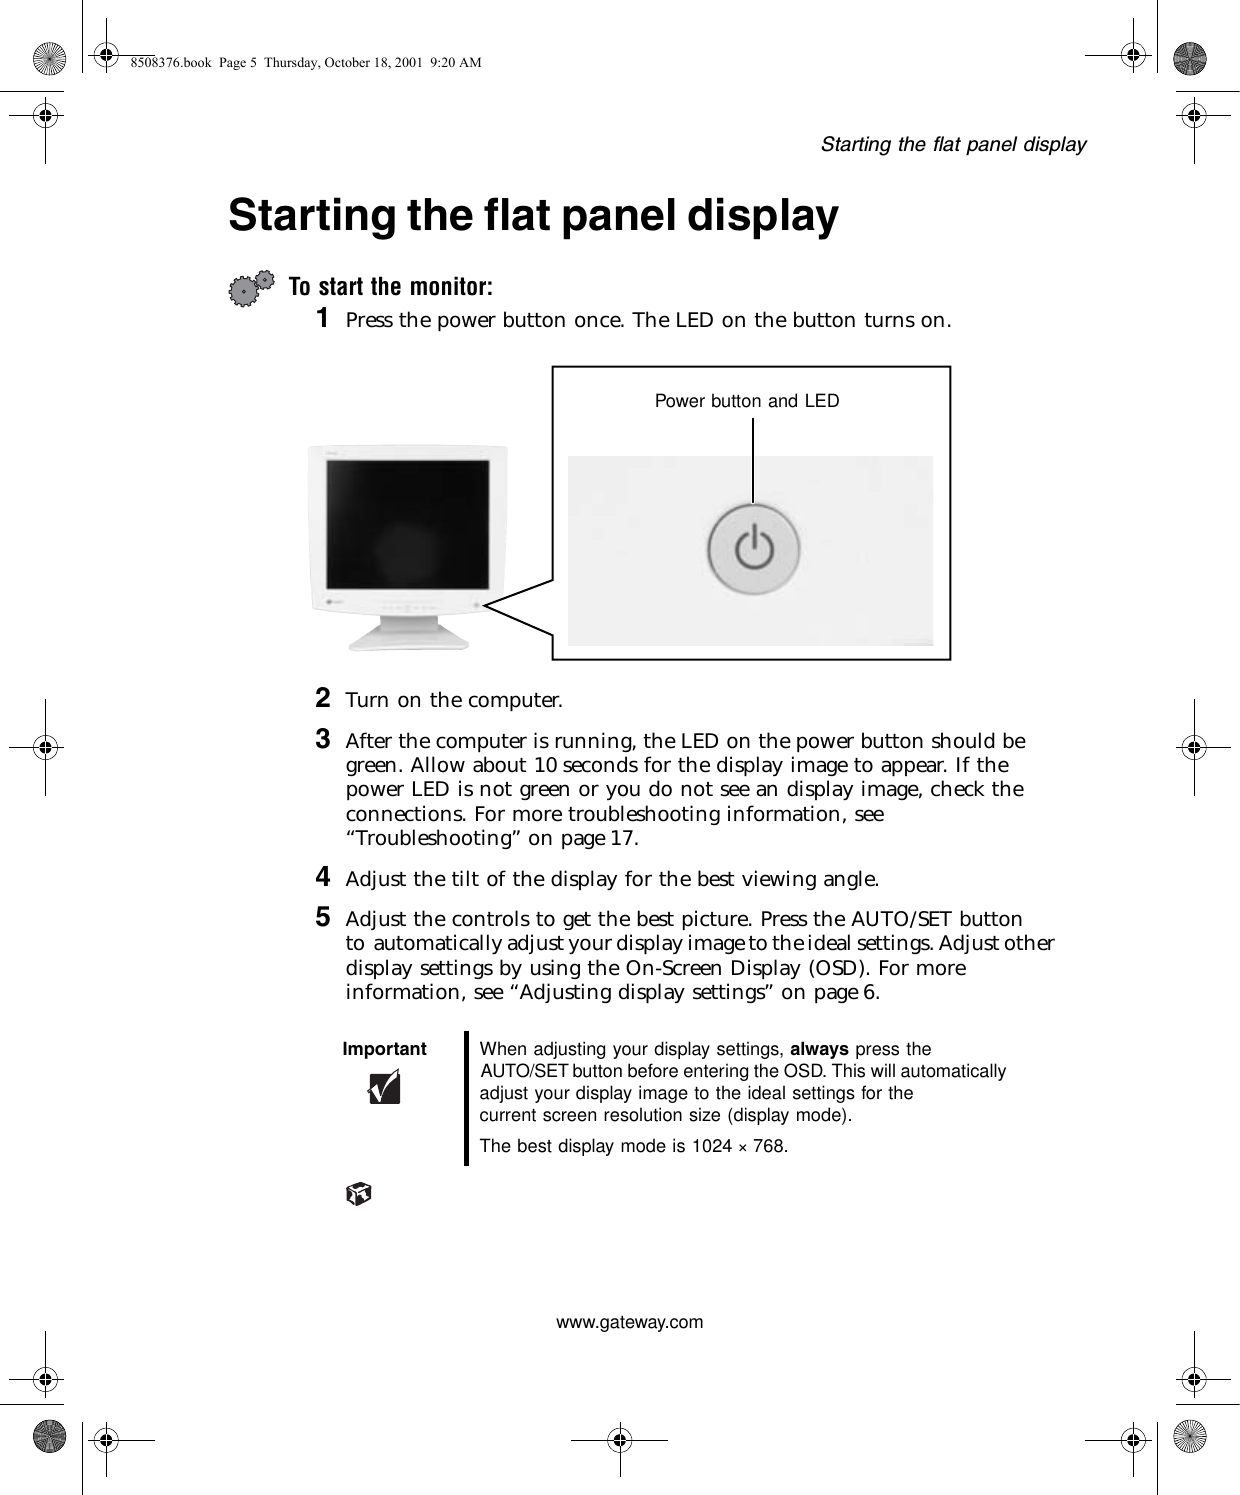 Starting the flat panel displaywww.gateway.comStarting the flat panel displayTo start the monitor:1Press the power button once. The LED on the button turns on.2Turn on the computer.3After the computer is running, the LED on the power button should be green. Allow about 10 seconds for the display image to appear. If the power LED is not green or you do not see an display image, check the connections. For more troubleshooting information, see “Troubleshooting” on page 17.4Adjust the tilt of the display for the best viewing angle.5Adjust the controls to get the best picture. Press the AUTO/SET buttonto  automatically adjust your display image to the ideal settings. Adjust other display settings by using the On-Screen Display (OSD). For more information, see “Adjusting display settings” on page 6.Important When adjusting your display settings, always press the AUTO/SET button before entering the OSD. This will automaticallyadjust your display image to the ideal settings for thecurrent screen resolution size (display mode).The best display mode is 1024 ×768.Power button and LED8508376.book  Page 5  Thursday, October 18, 2001  9:20 AM